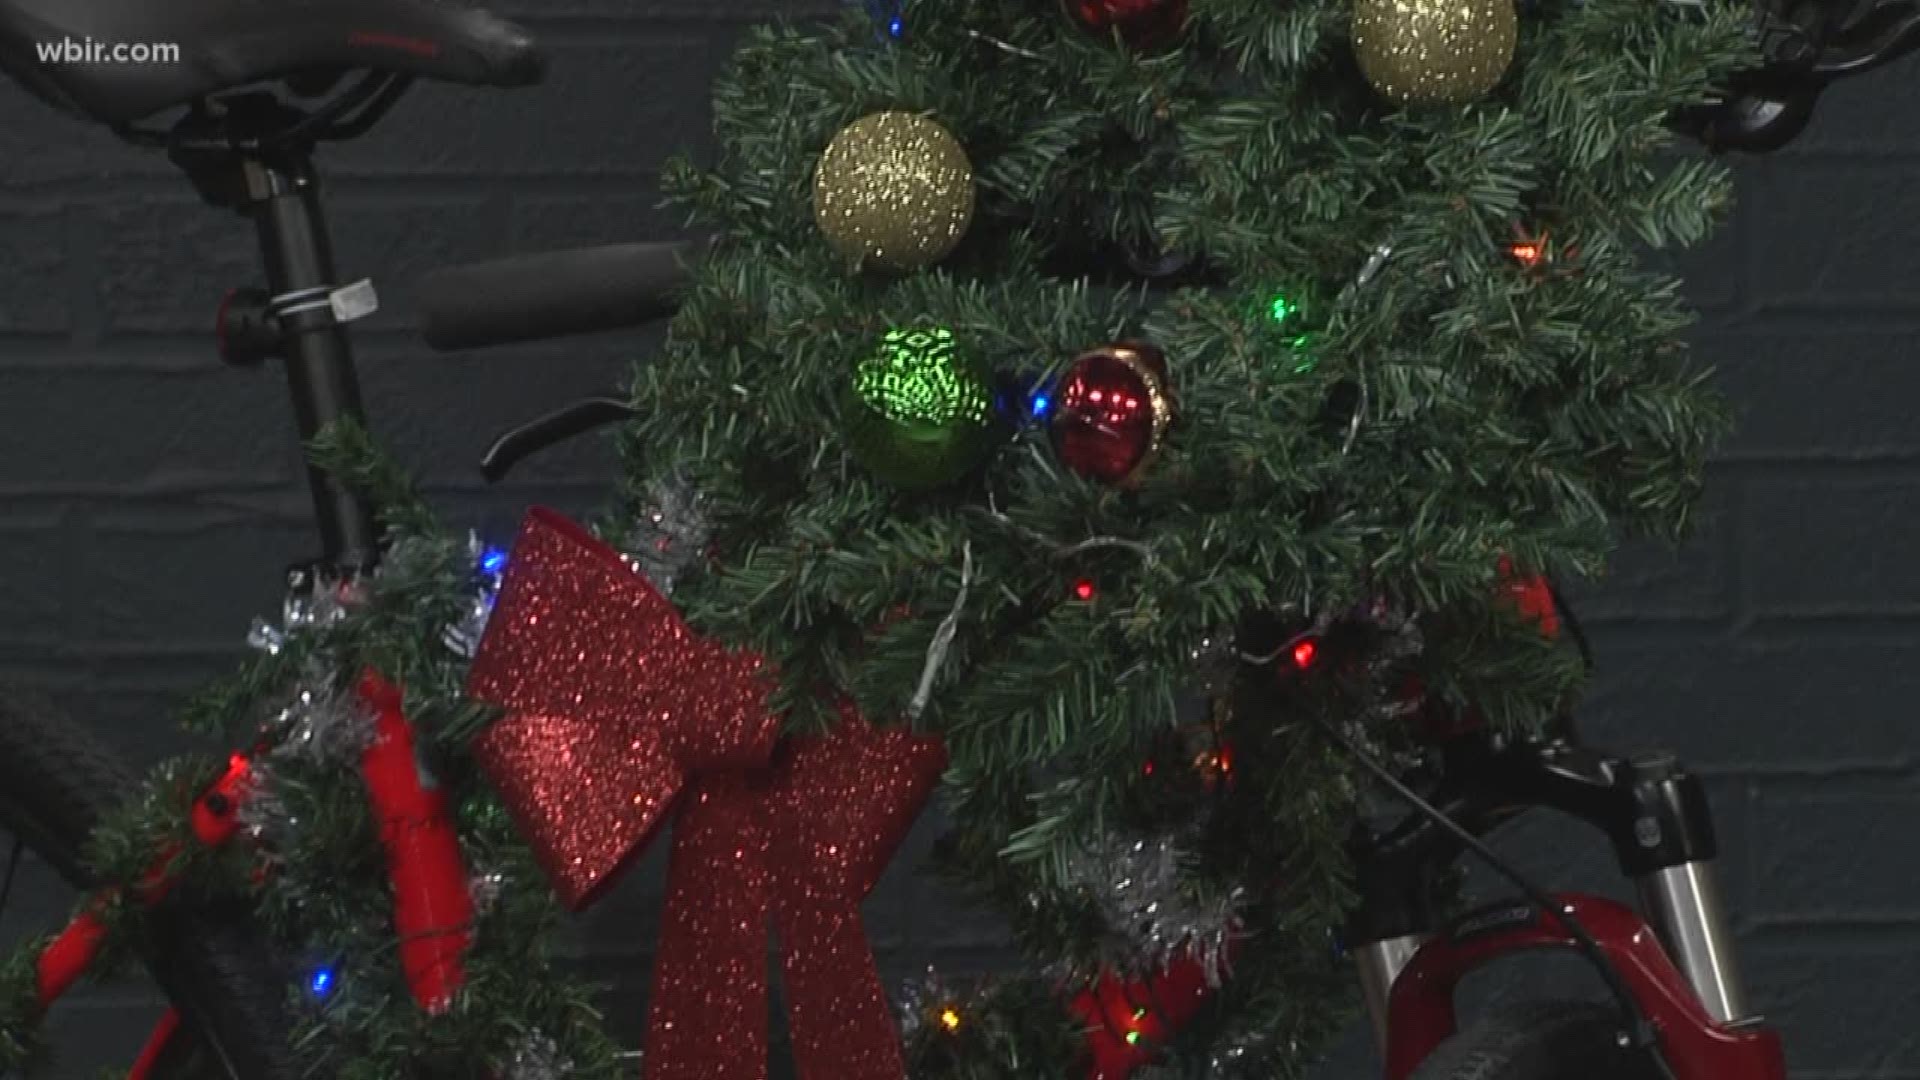 River Sports Outfitters is hosting a decorating party before the 12th annual Tour de Lights through downtown Knoxville.